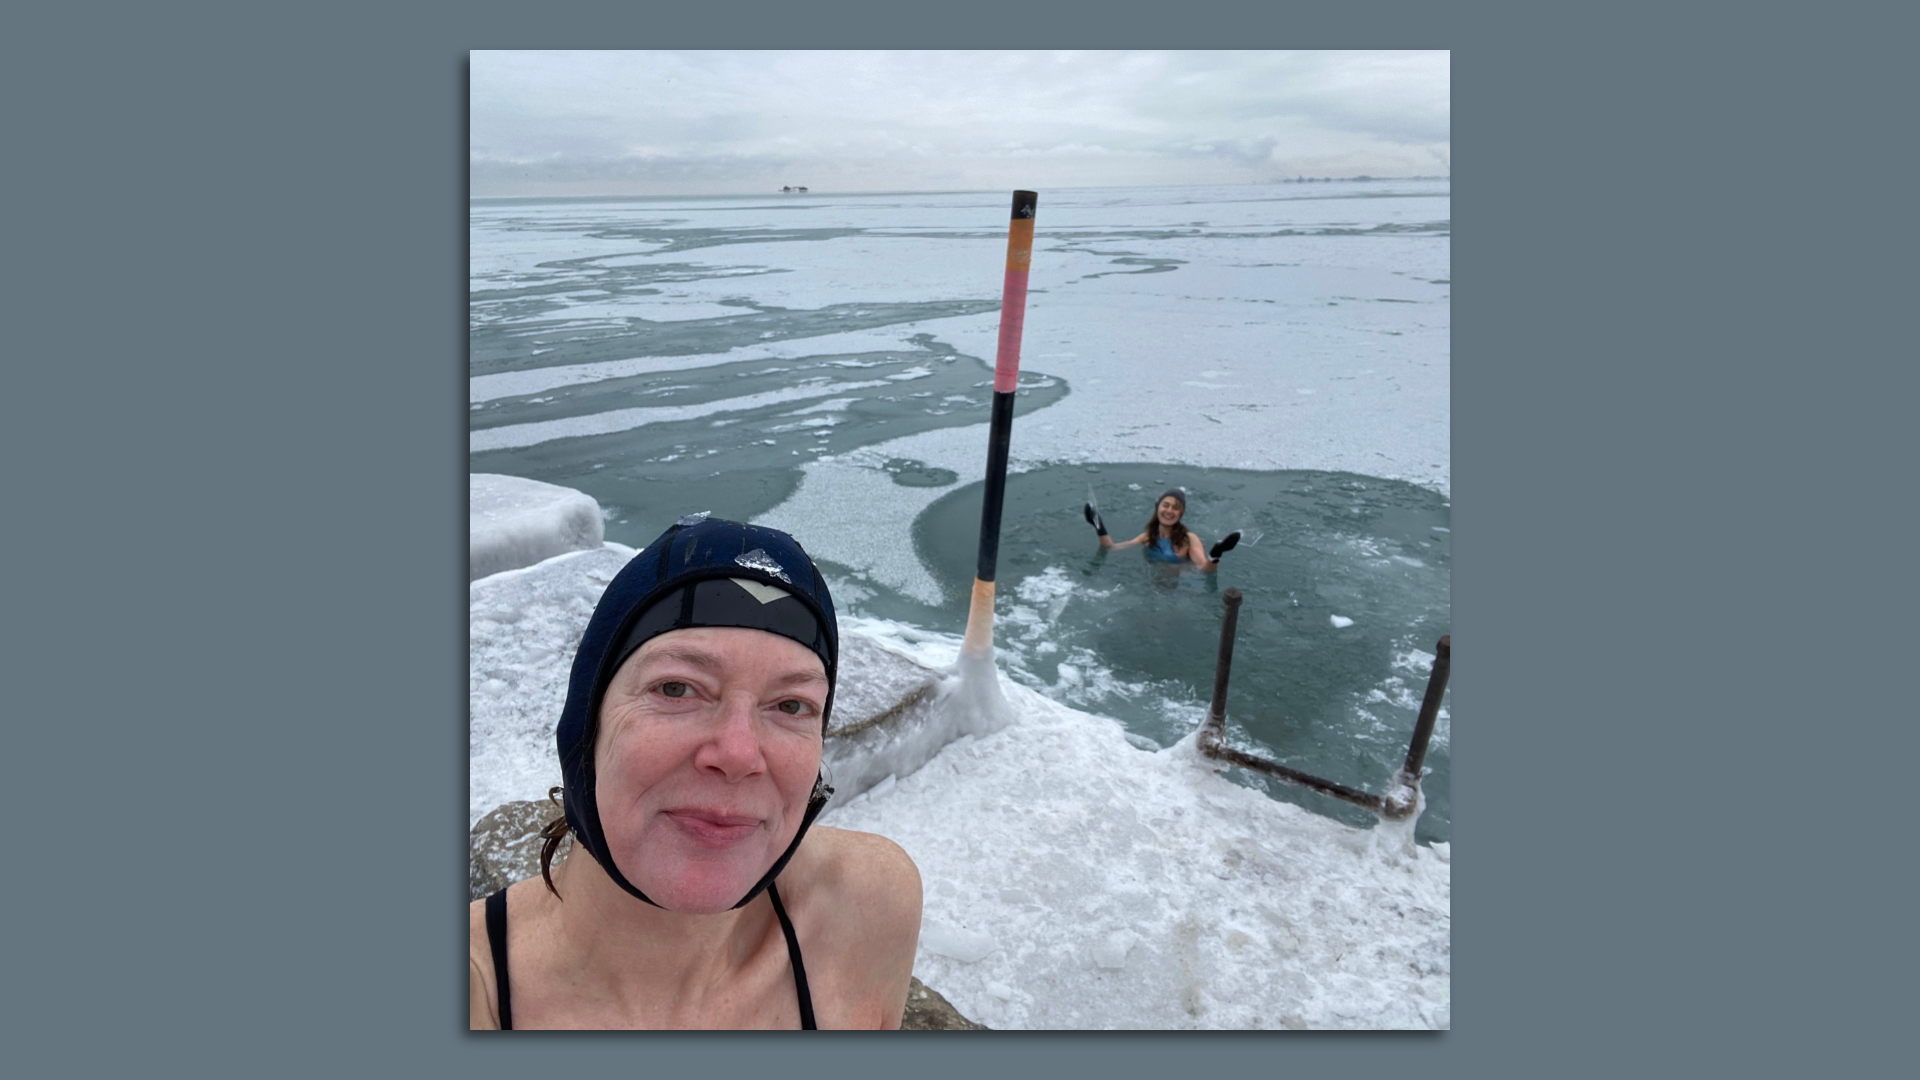 Photo of a woman in a swim cap getting ready to swim in icy waters